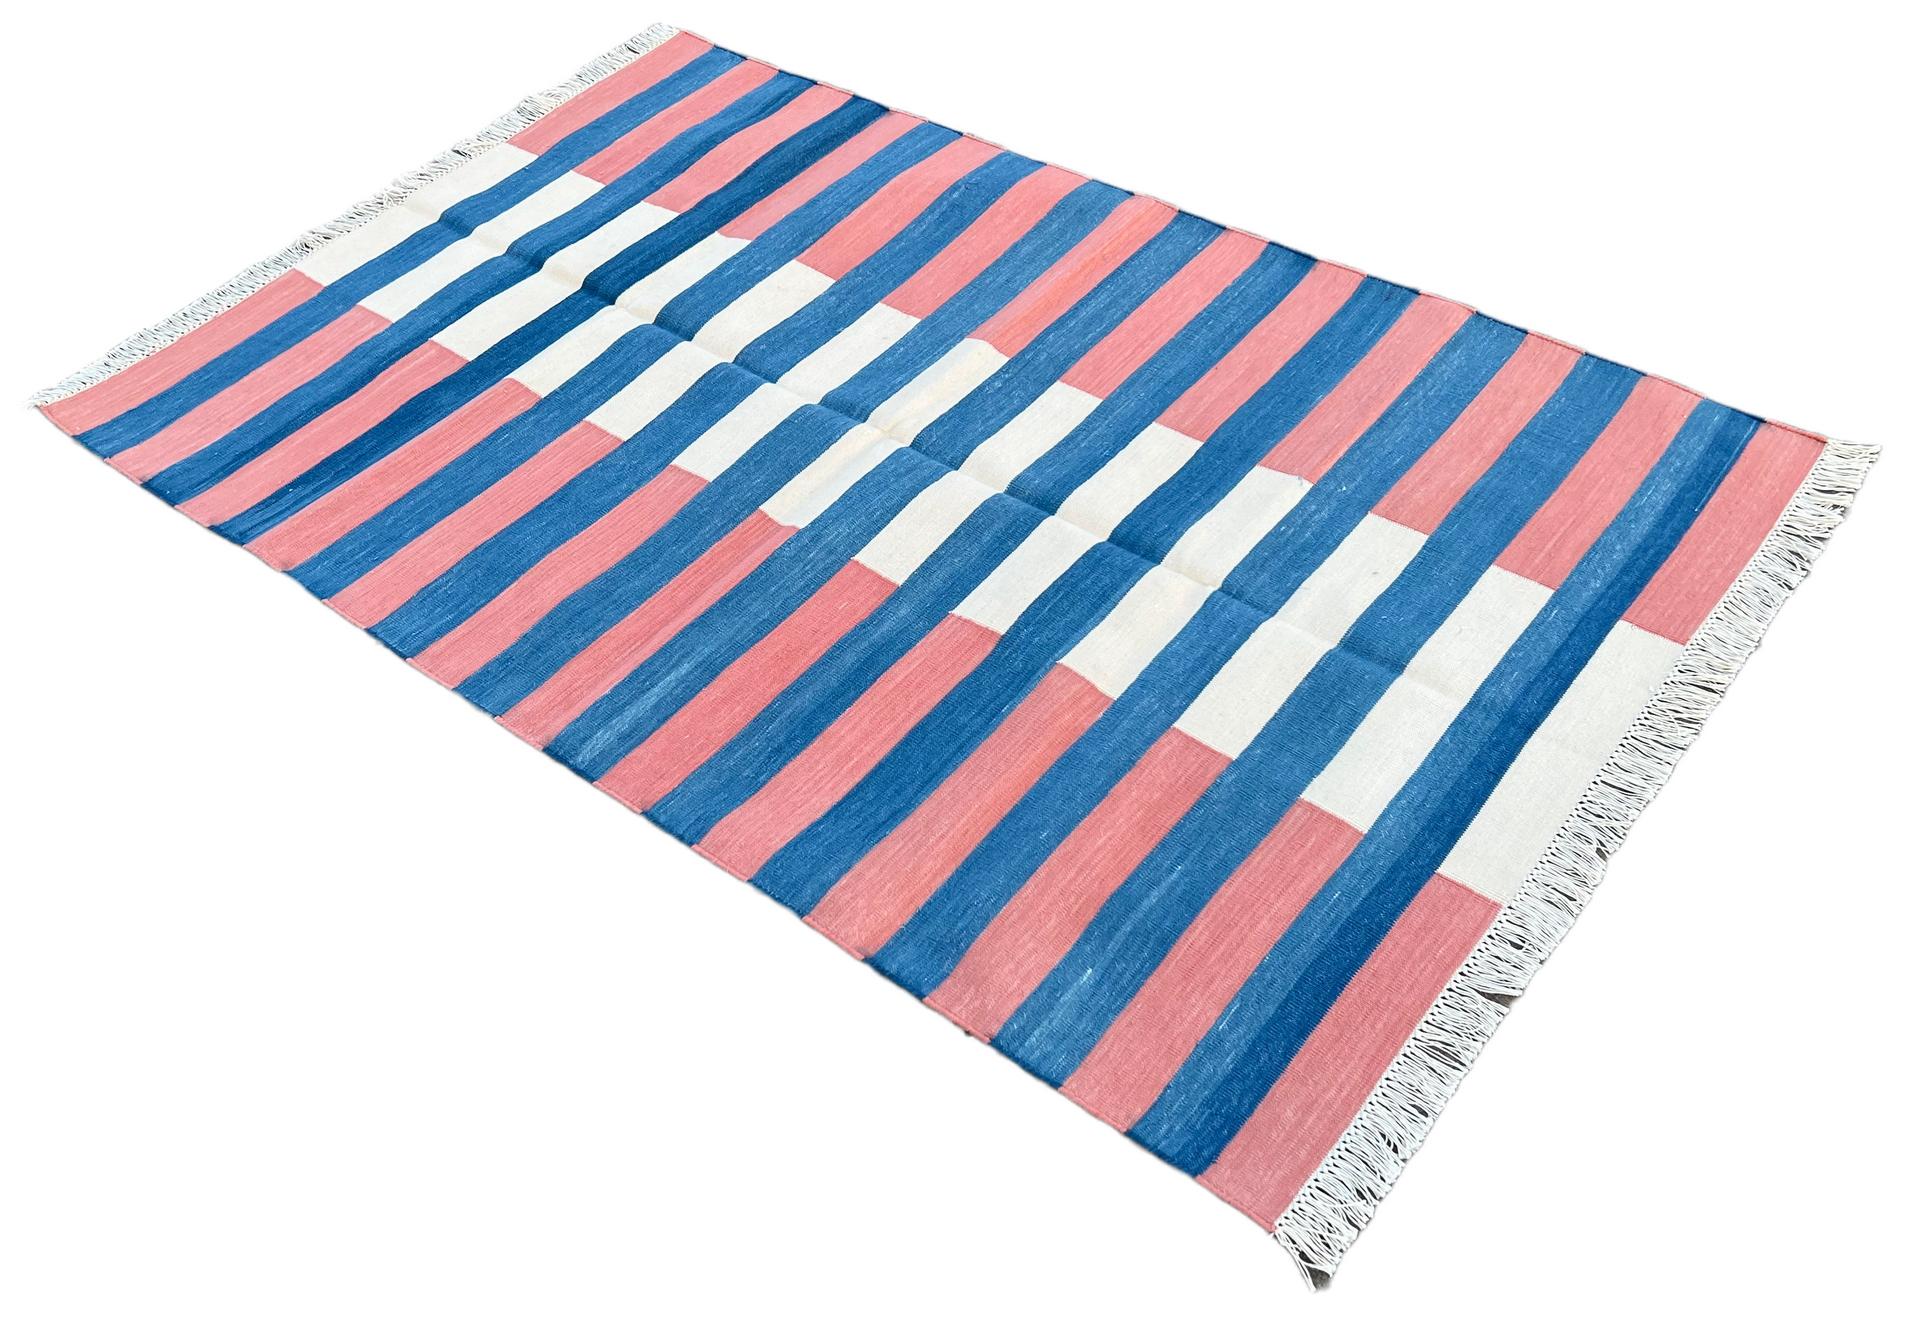 Cotton Natural Vegetable Dyed, Blue And Red Striped Indian Rug - 3'x5'
These special flat-weave dhurries are hand-woven with 15 ply 100% cotton yarn. Due to the special manufacturing techniques used to create our rugs, the size and color of each